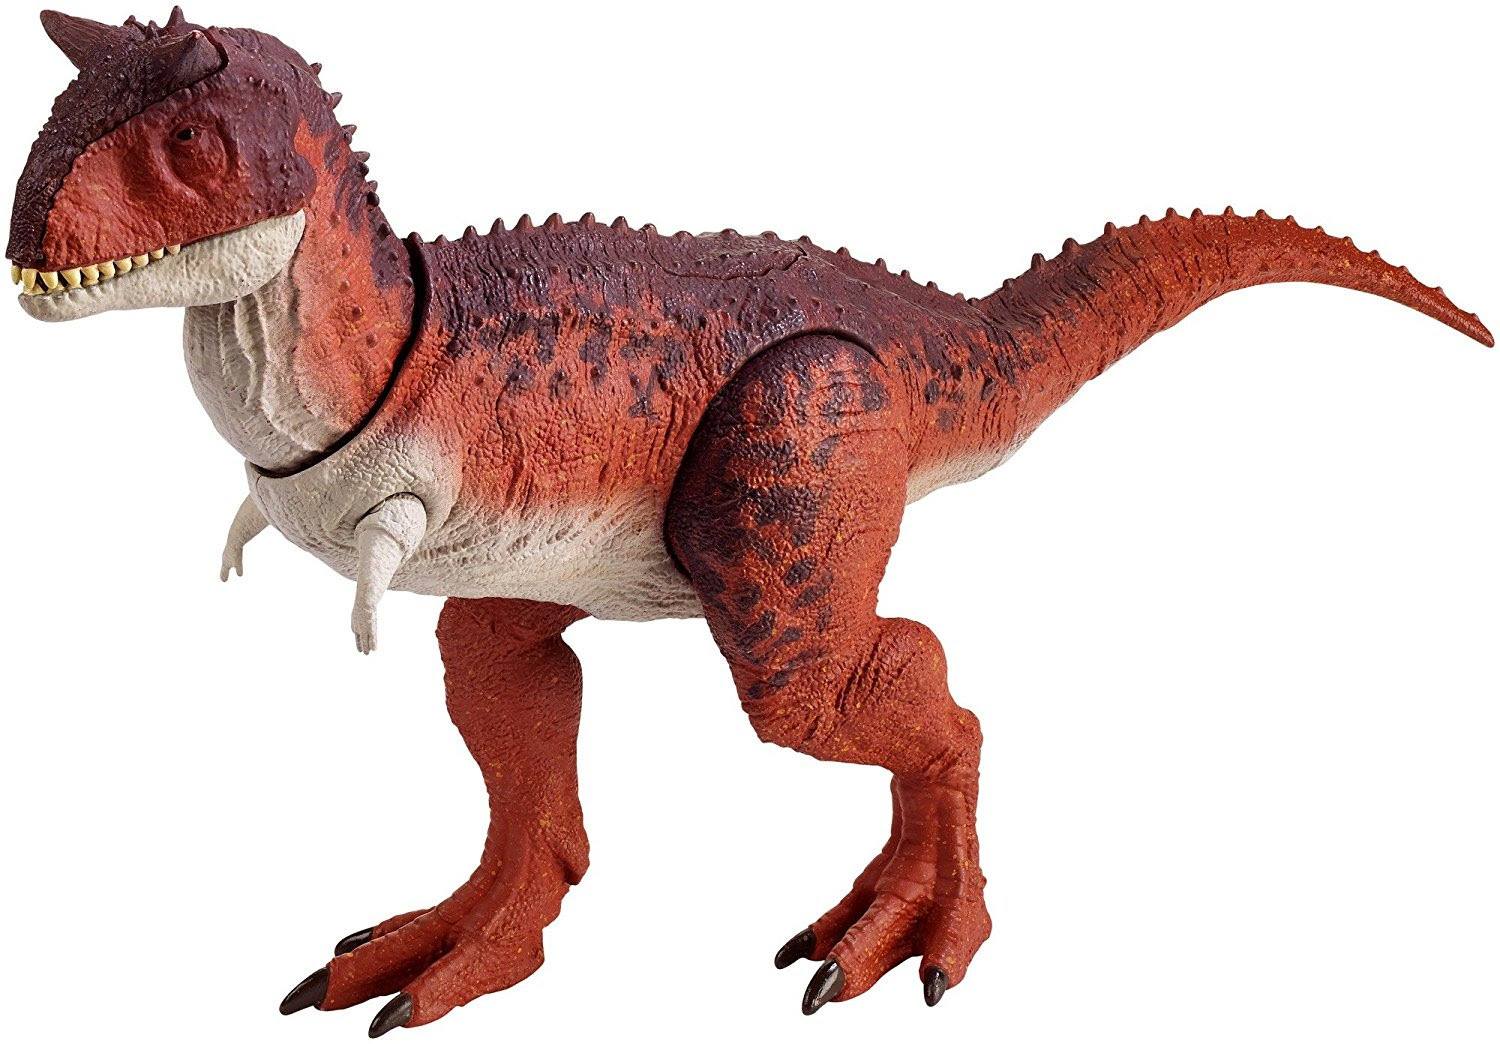 So, whether you're a fan of the jurassic park films or a budding scientist working on your palaeontology skills, these lego builds will provide hours of fun. Jurassic World Toys PreOrders and New Products Live The Toyark News